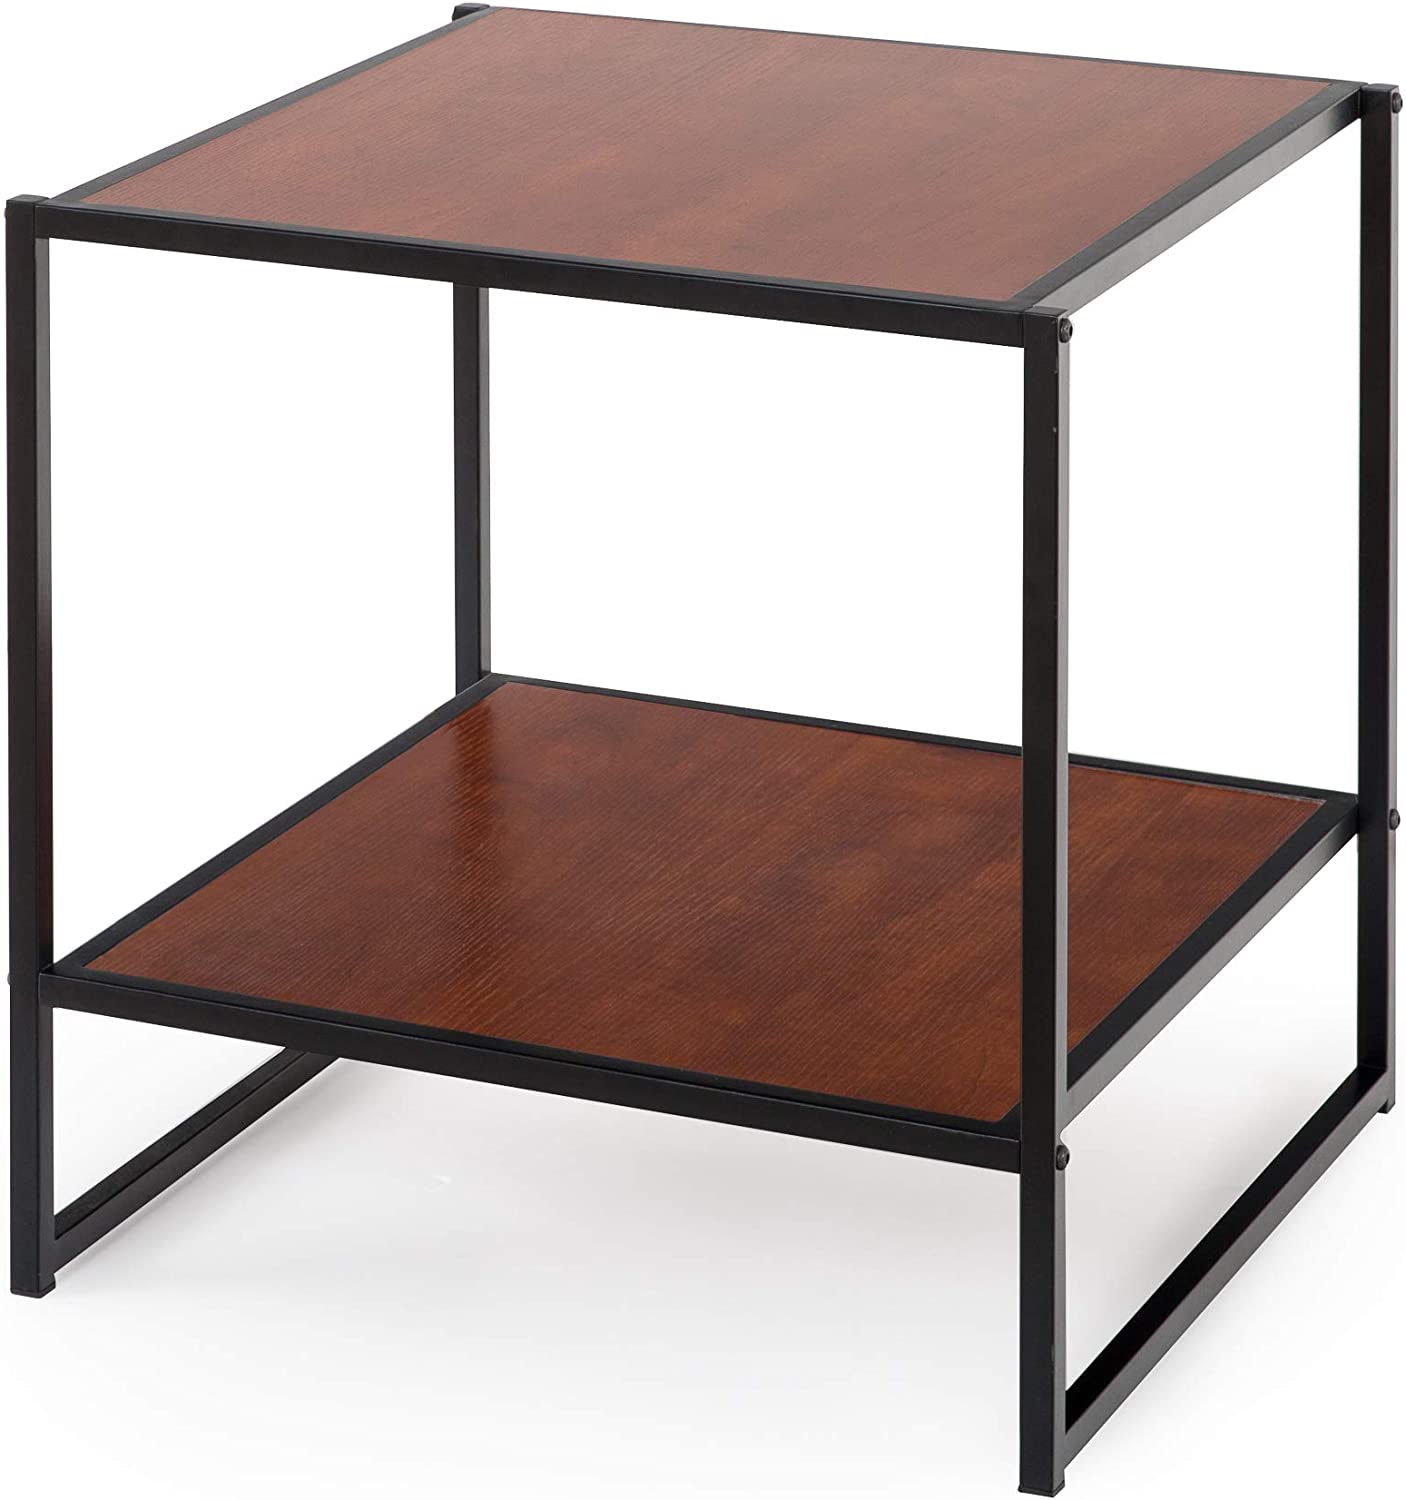 Side Tables:Black Frame Side Table / End Table / Easy Assembly, Red mahogany wood grain